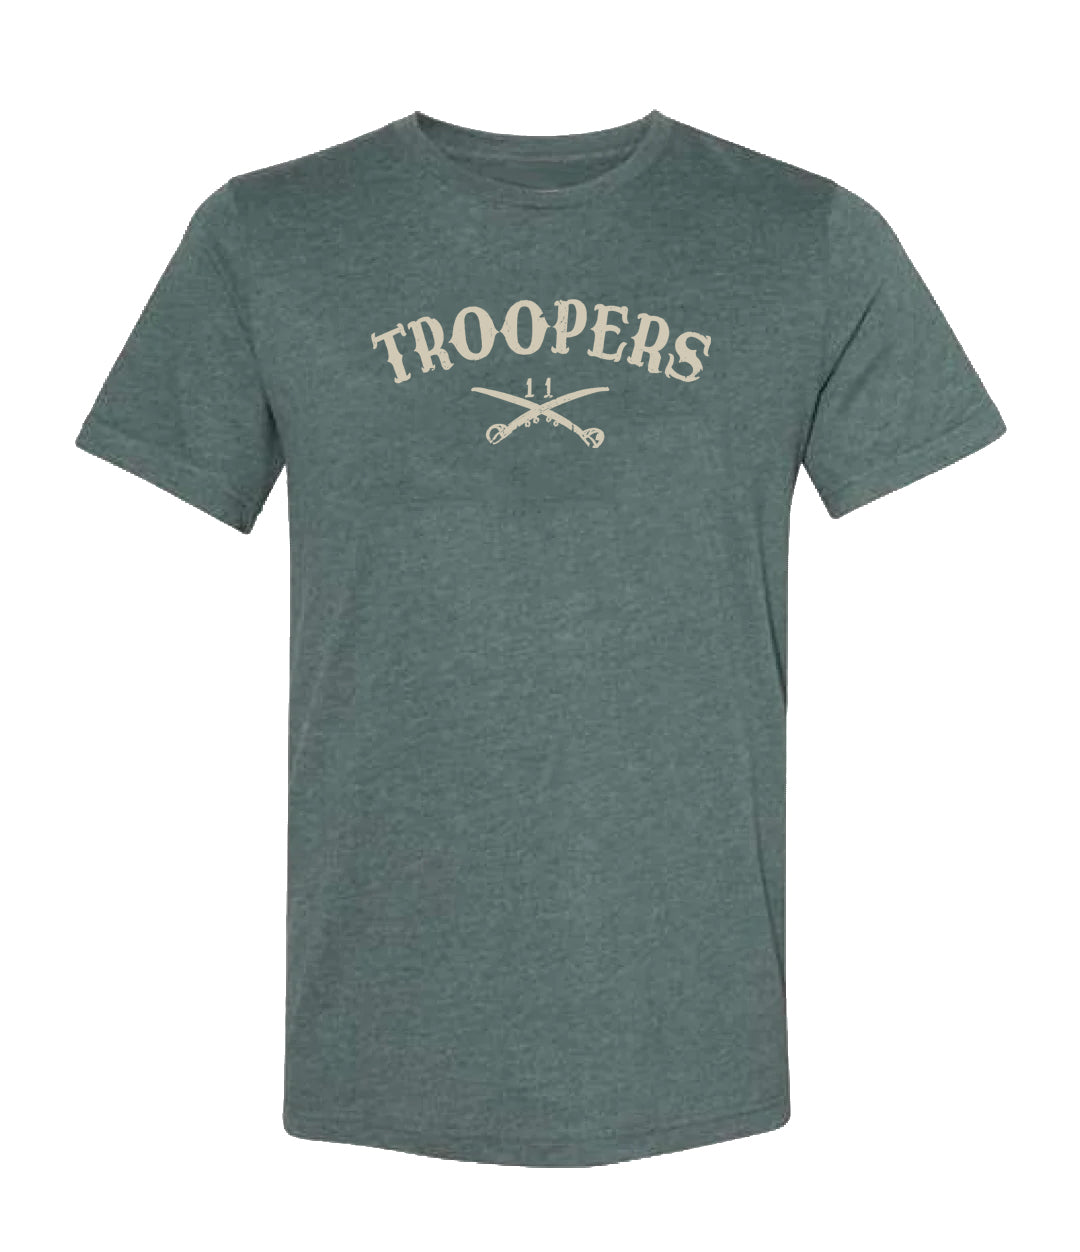 The Basic Troopers Tee